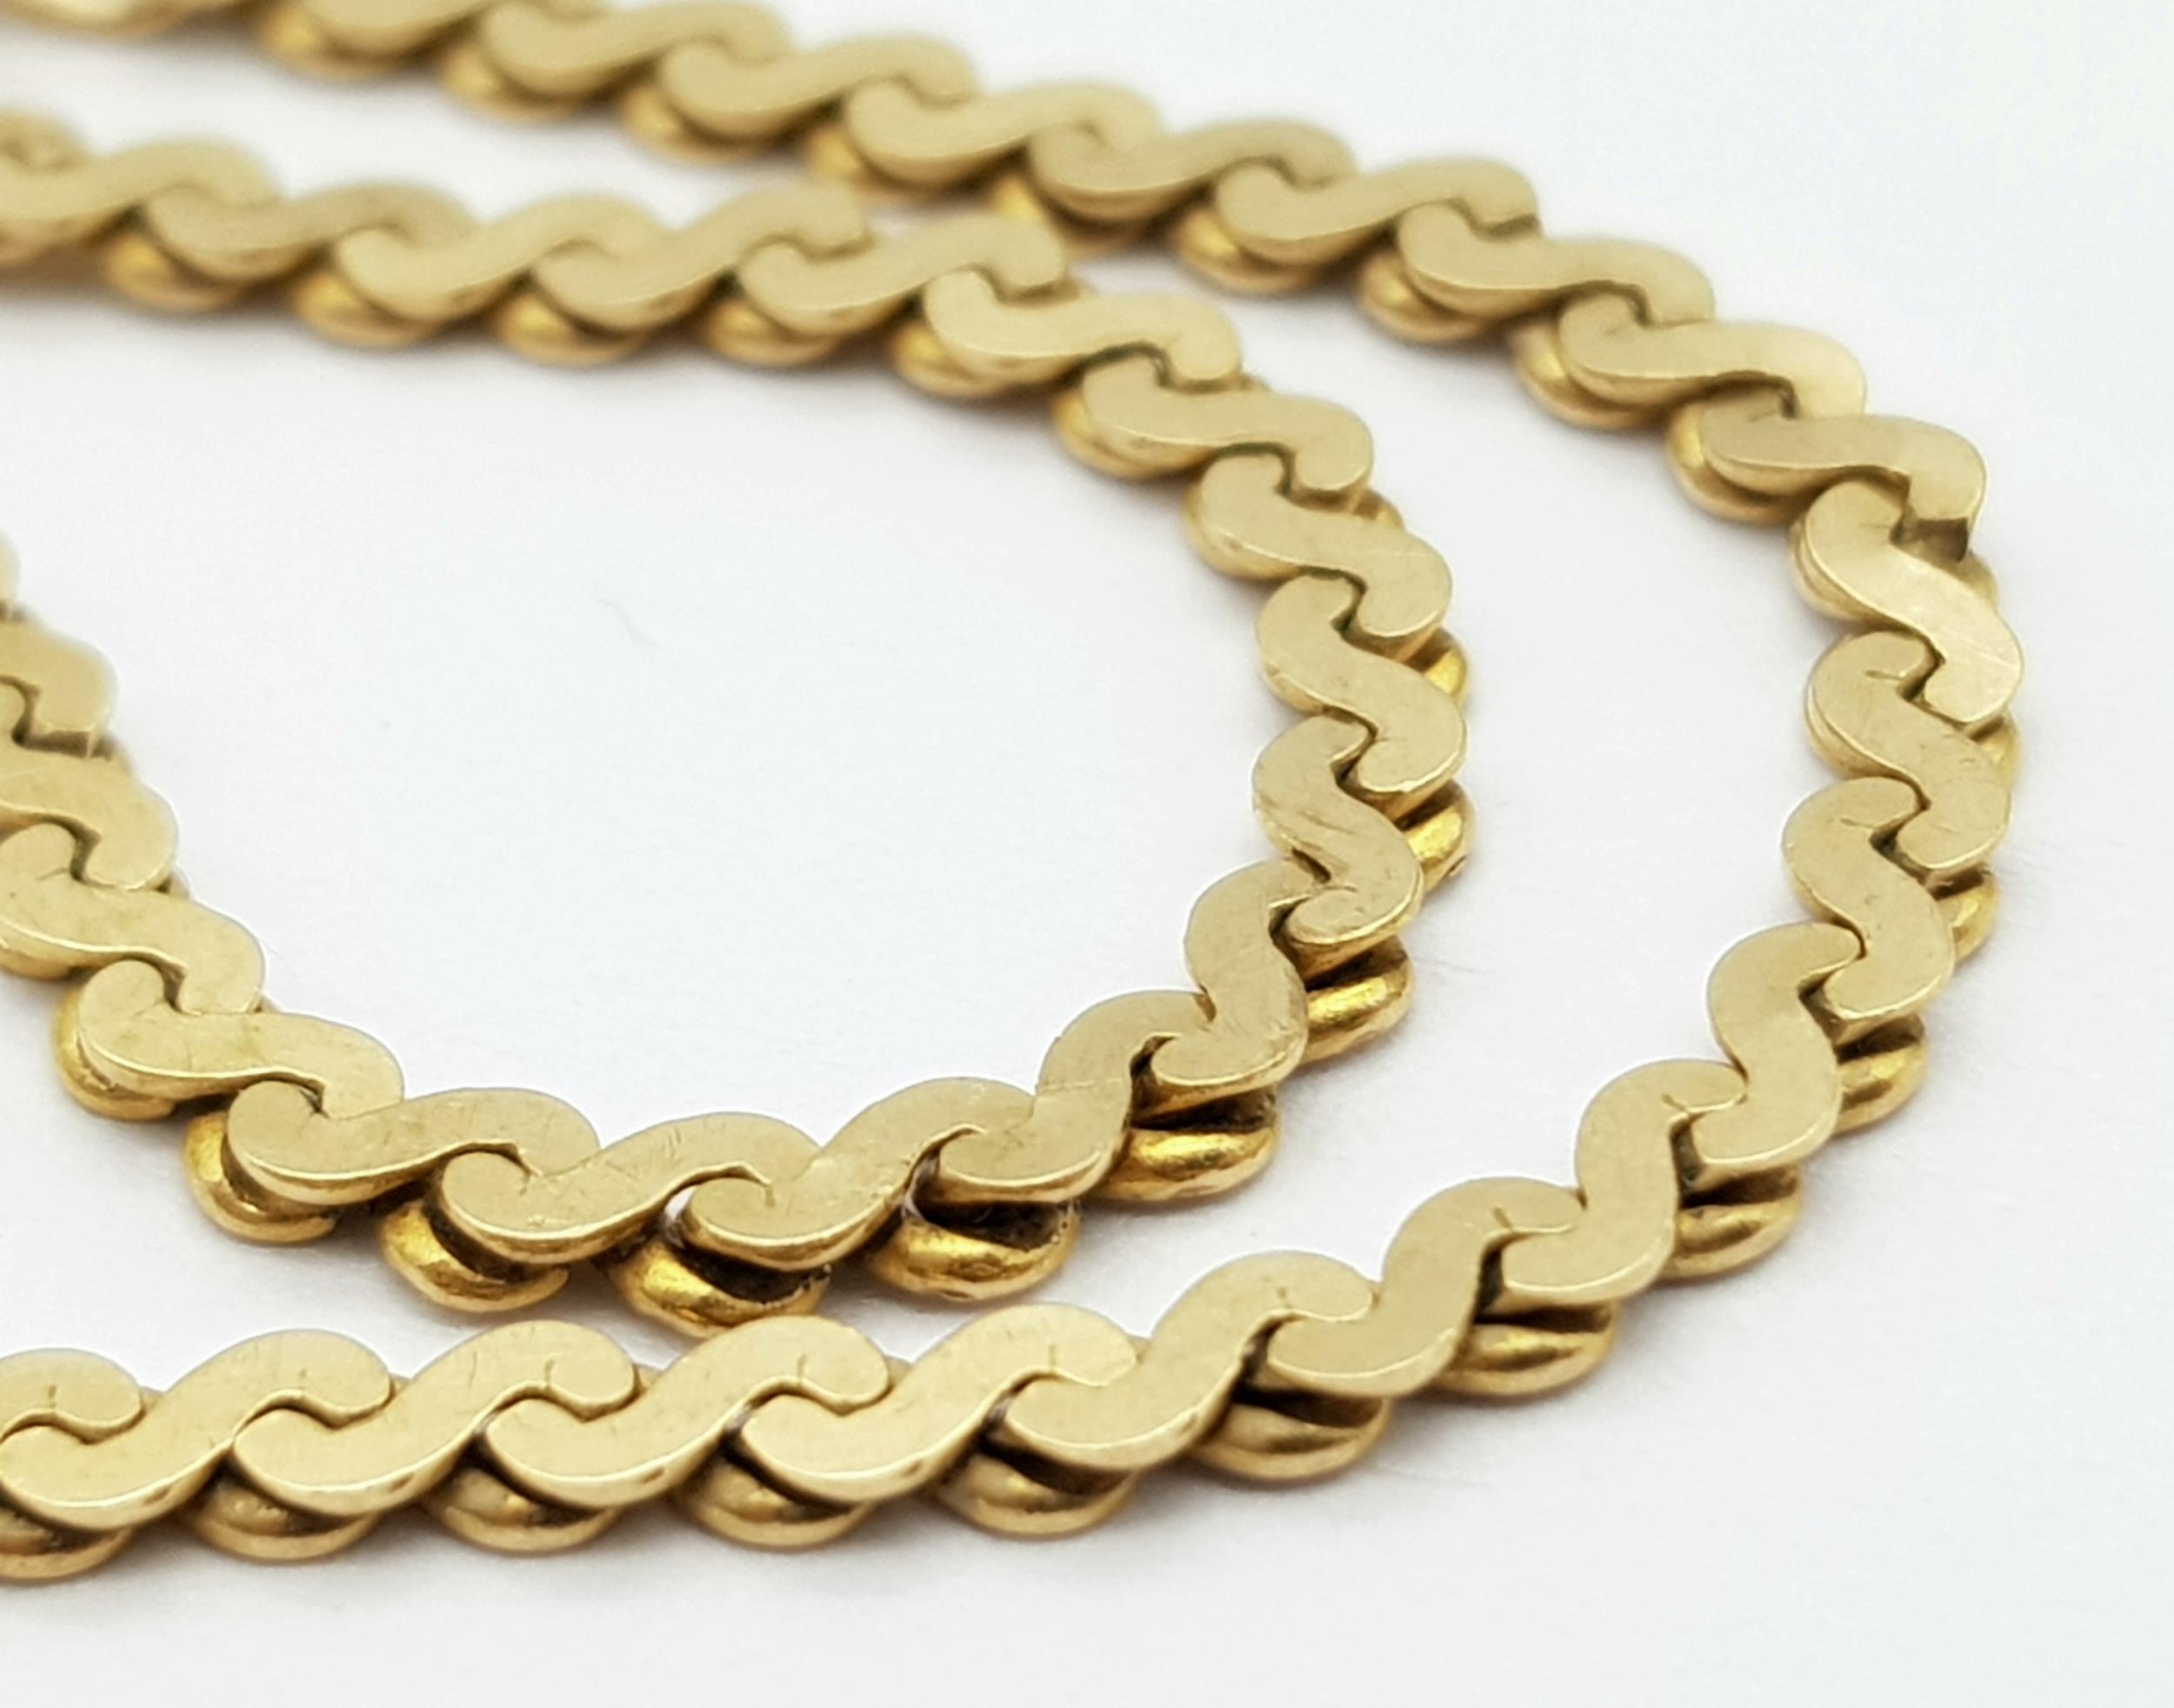 A 9K Yellow Gold Serpentine Link Bracelet. 17cm. 3.9g weight. - Image 4 of 5